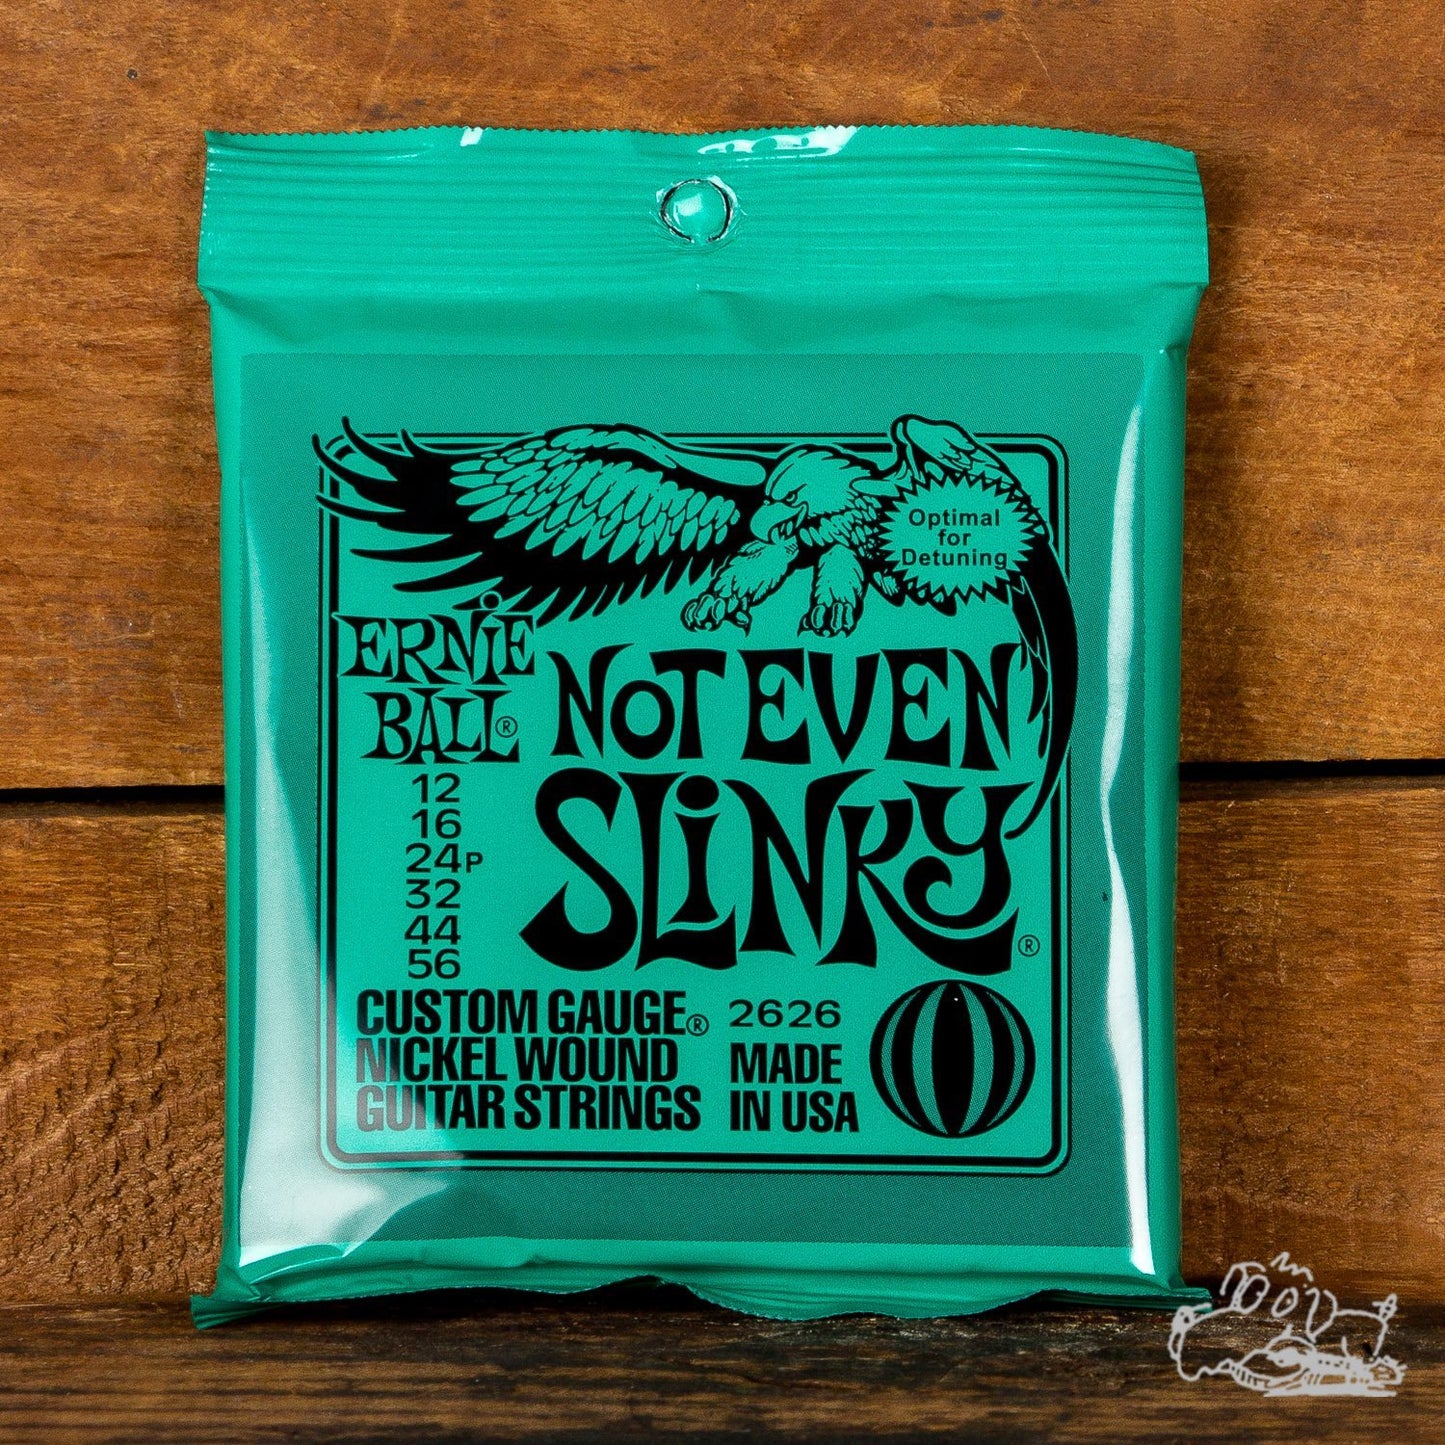 Ernie Ball Not Even Slinky Electric Guitar Strings 12-56